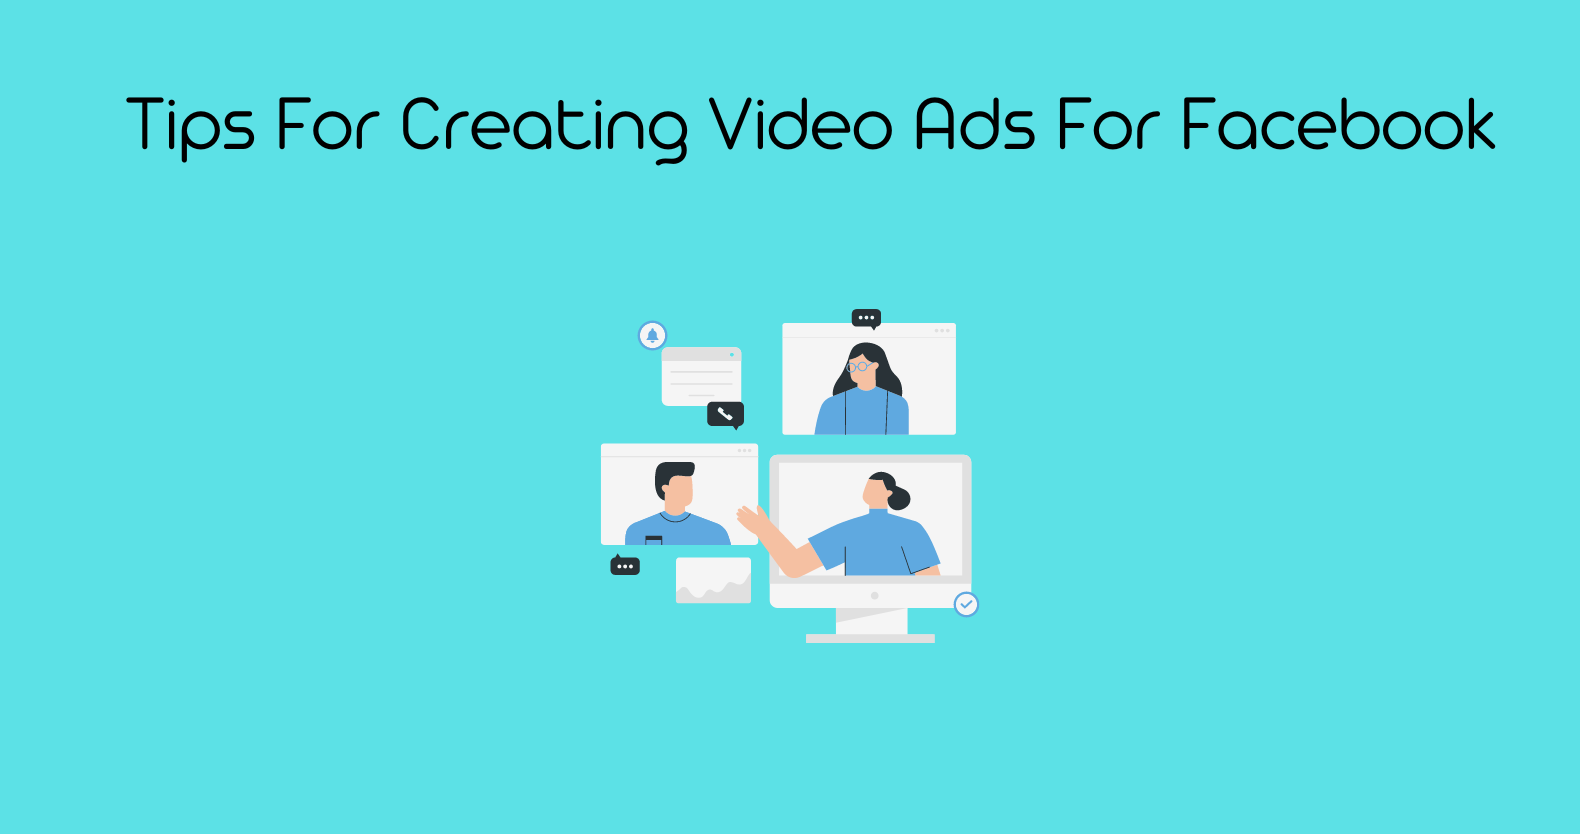 Tips For Creating Video Ads For Facebook